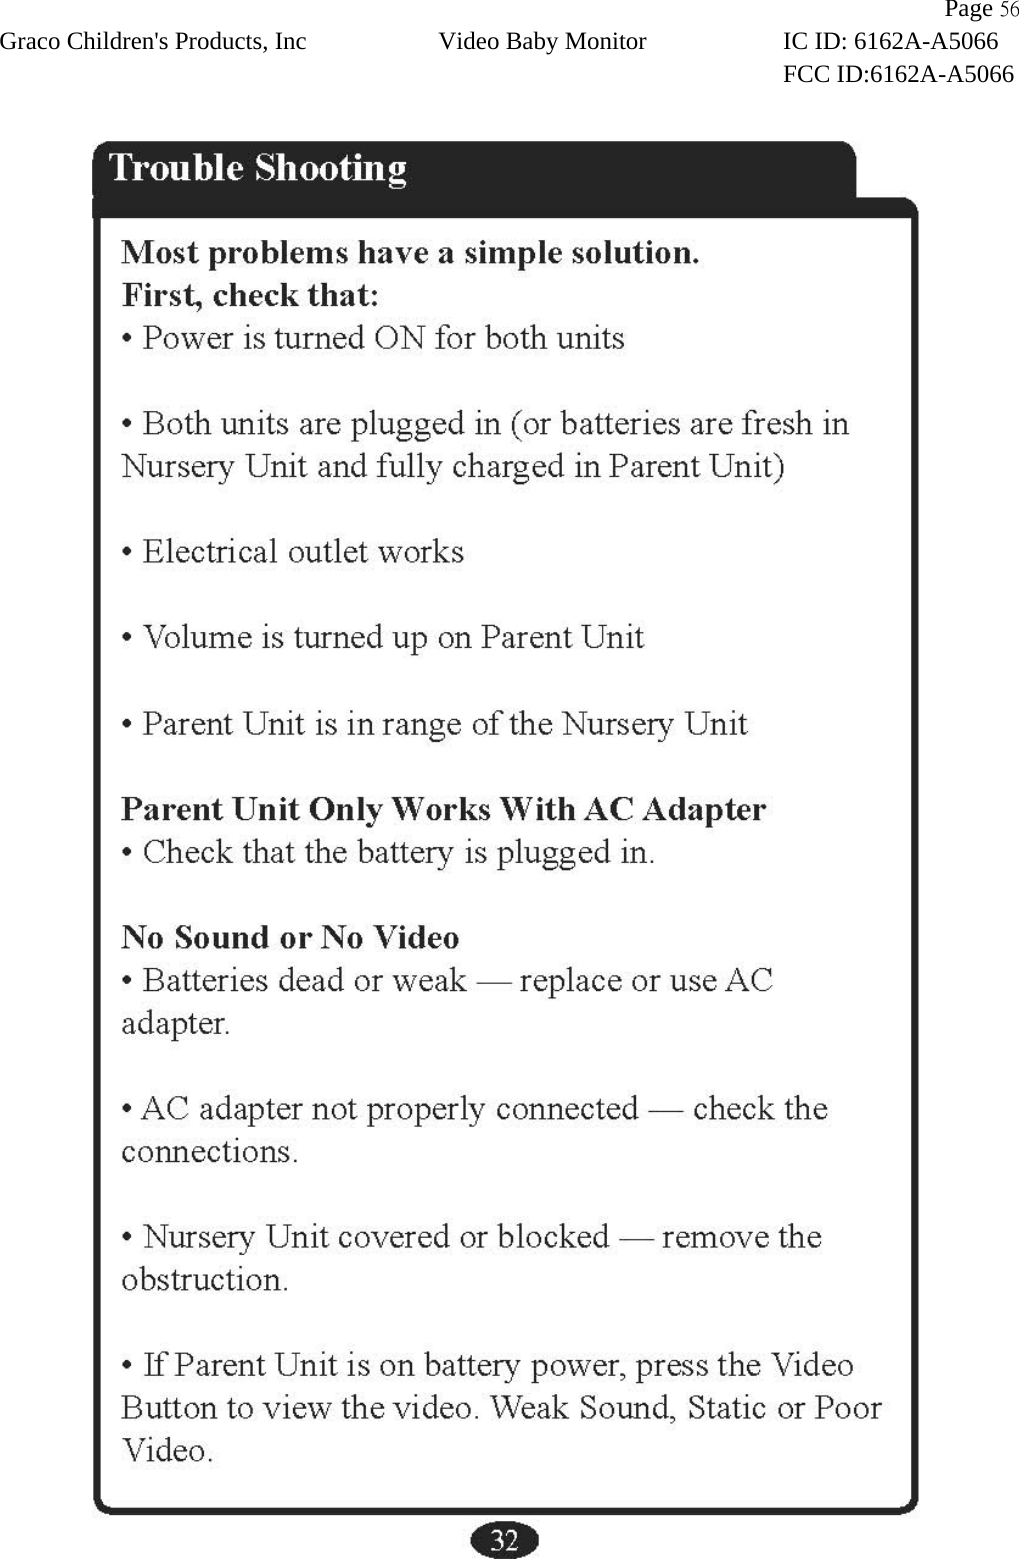                Page 56 Graco Children&apos;s Products, Inc Video Baby Monitor IC ID: 6162A-A5066 FCC ID:6162A-A5066    